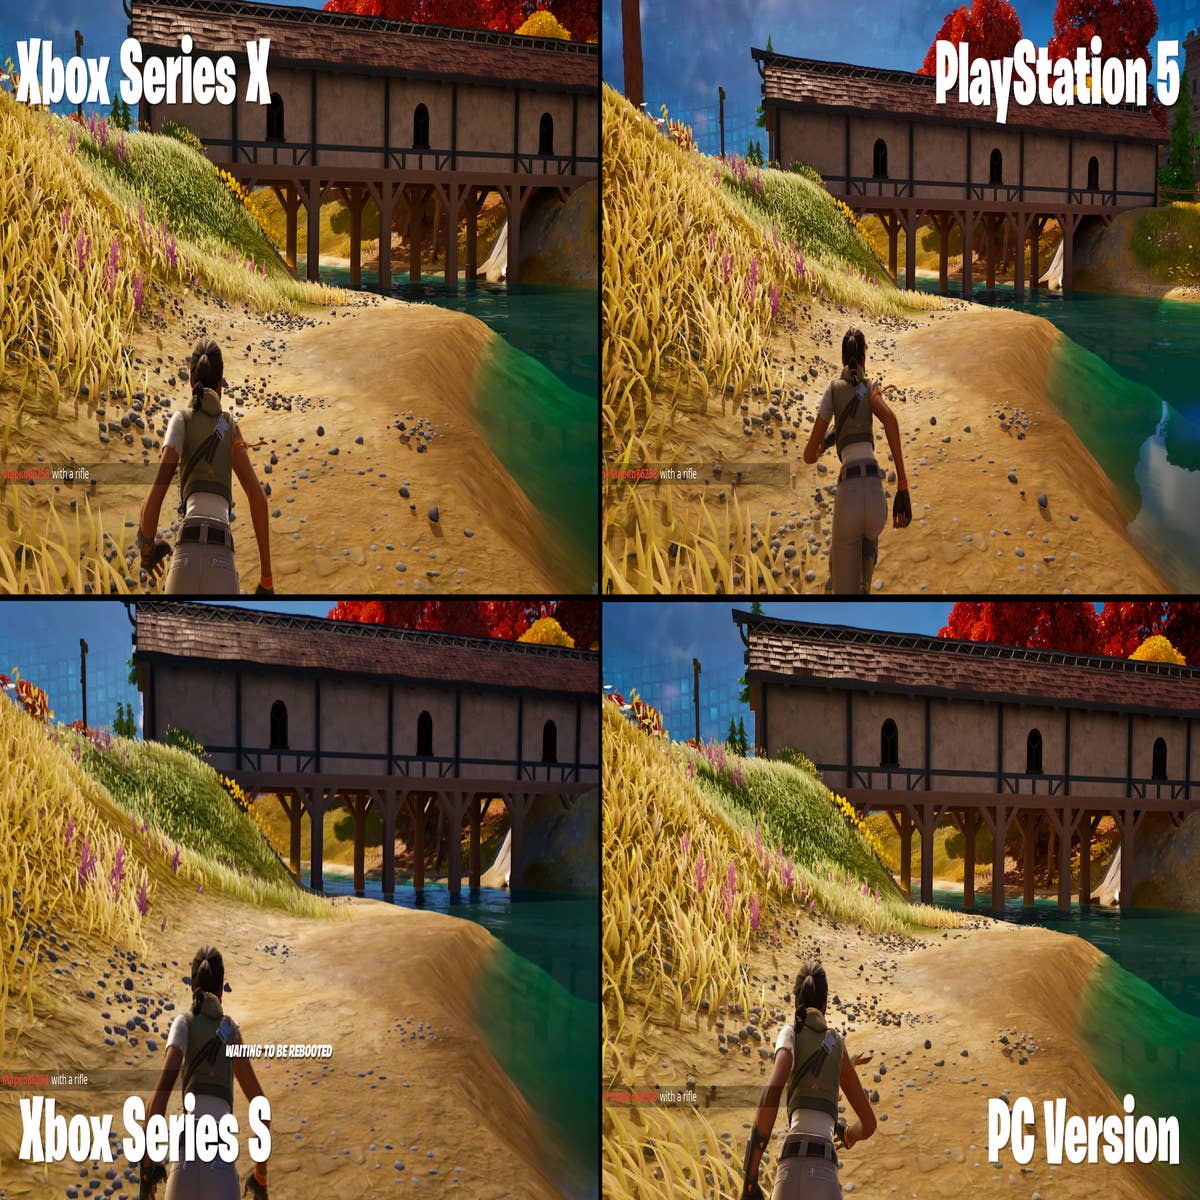 How do I enable 120 FPS in Fortnite on my PlayStation 5 or Xbox Series X